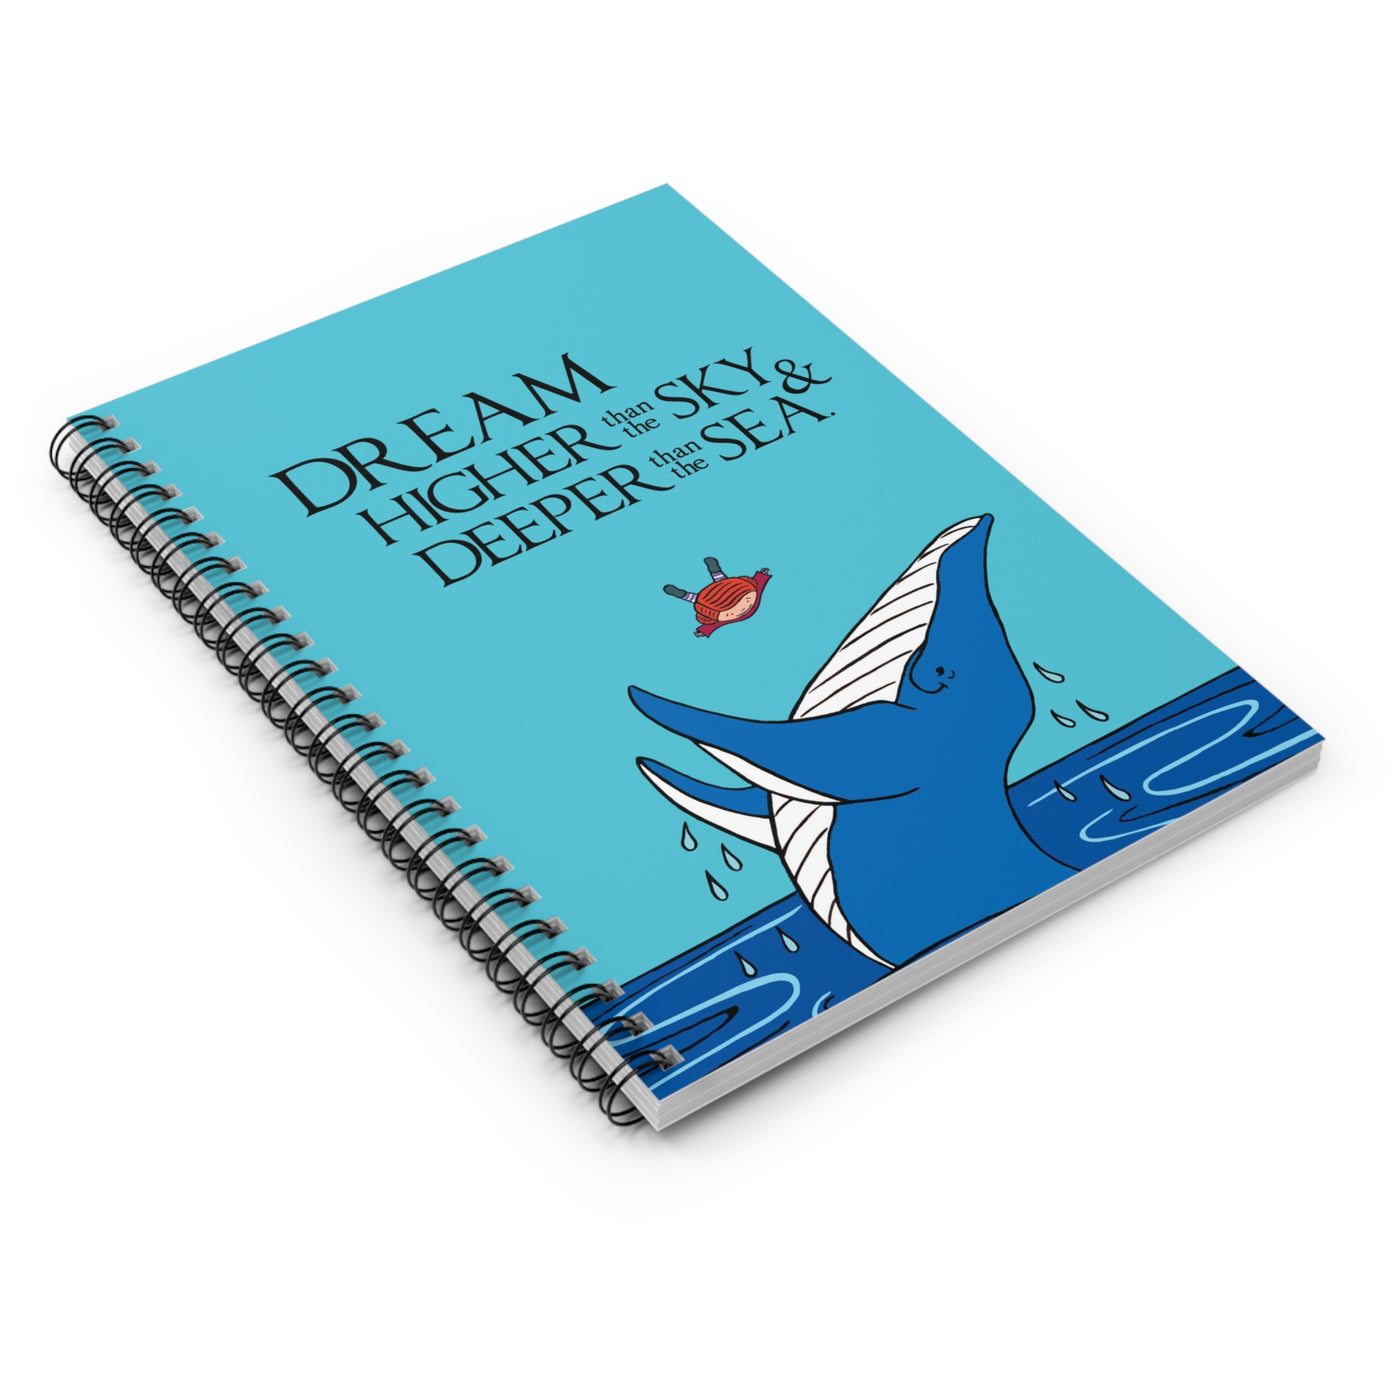 Dream Higher than the Sky and Deeper than the Ocean Small Notebook - Ruled Line